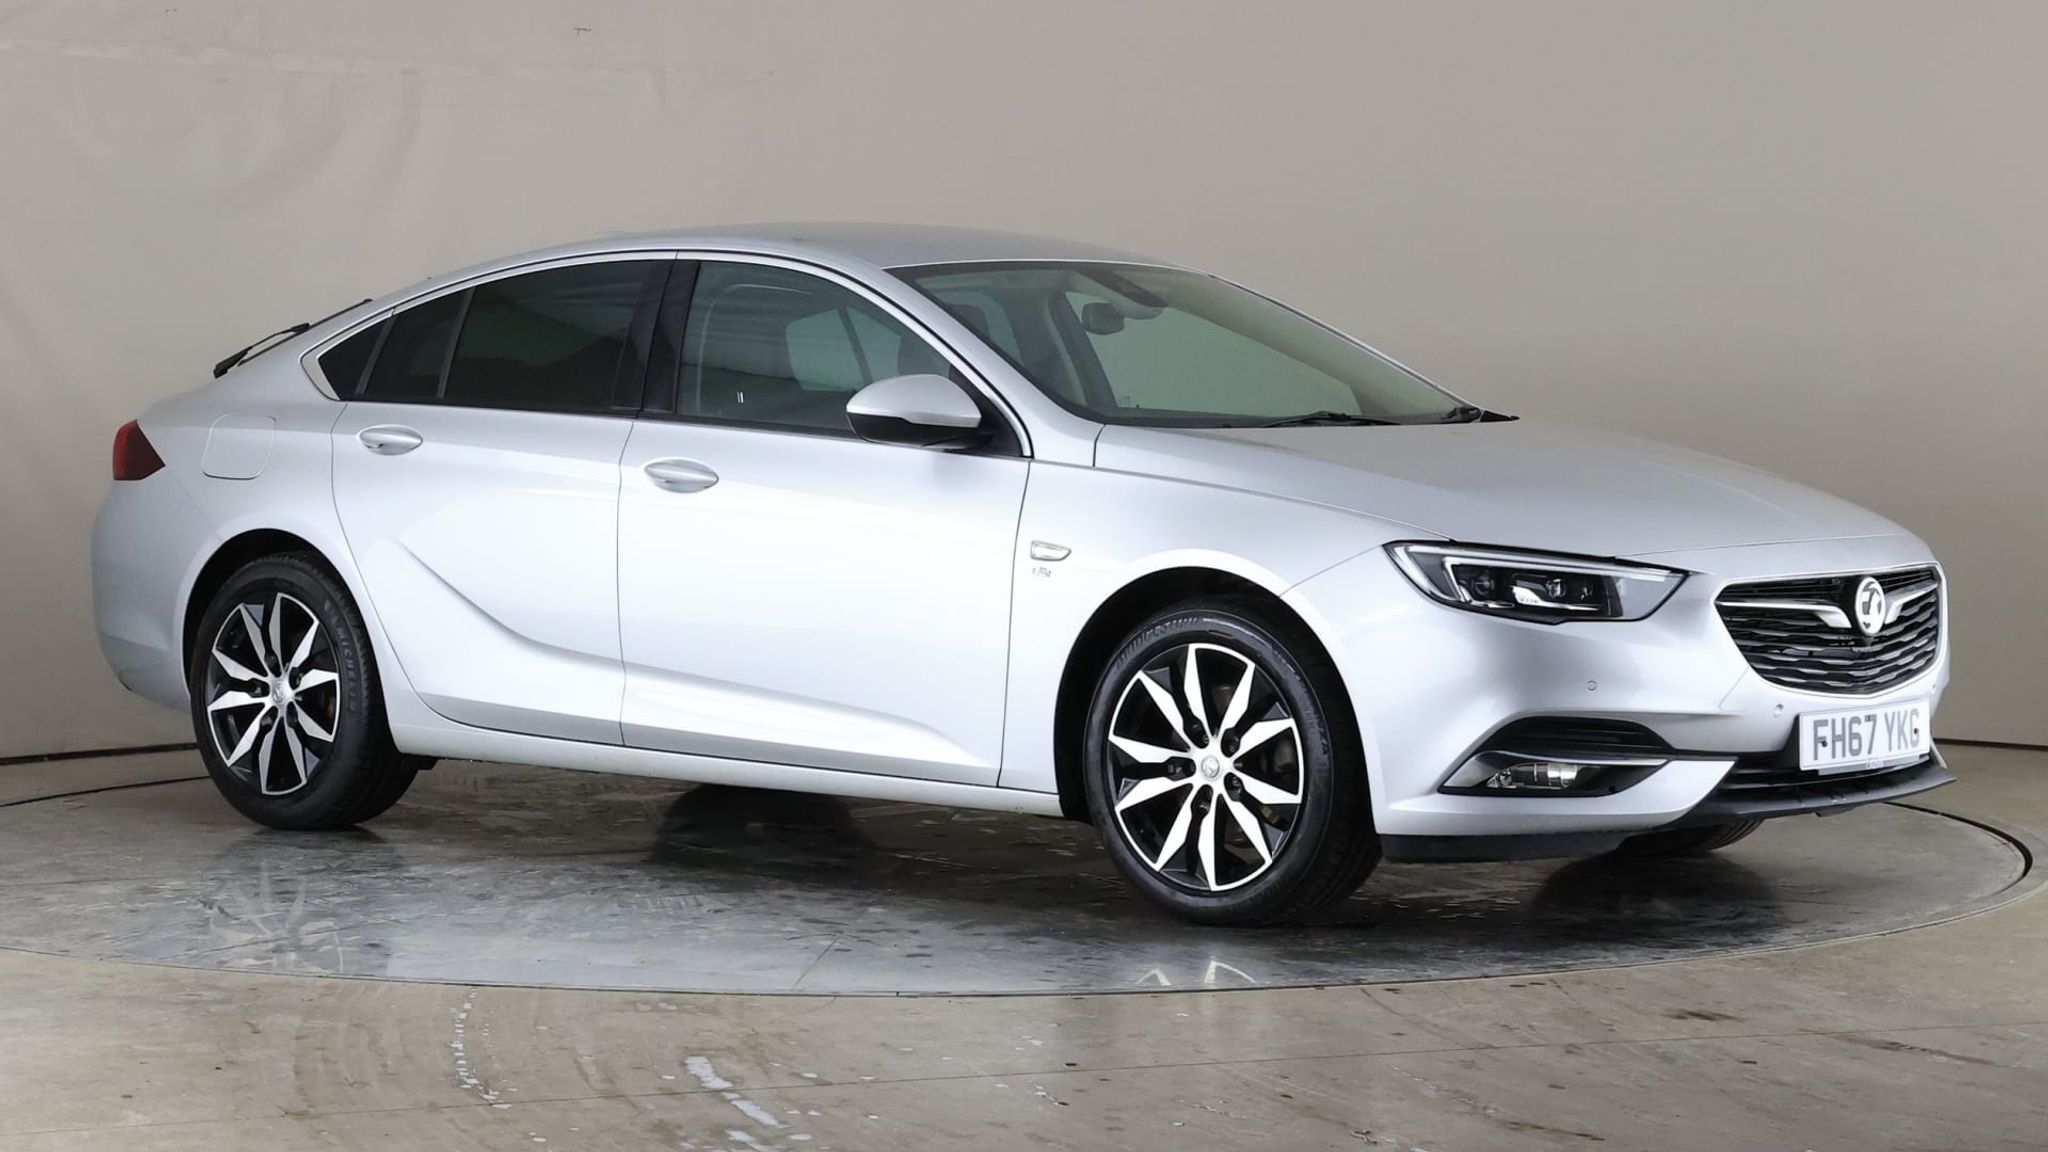 2018 used Vauxhall Insignia 2.0 Turbo D BlueInjection Elite Nav Grand Sport Automatic (170 ps)